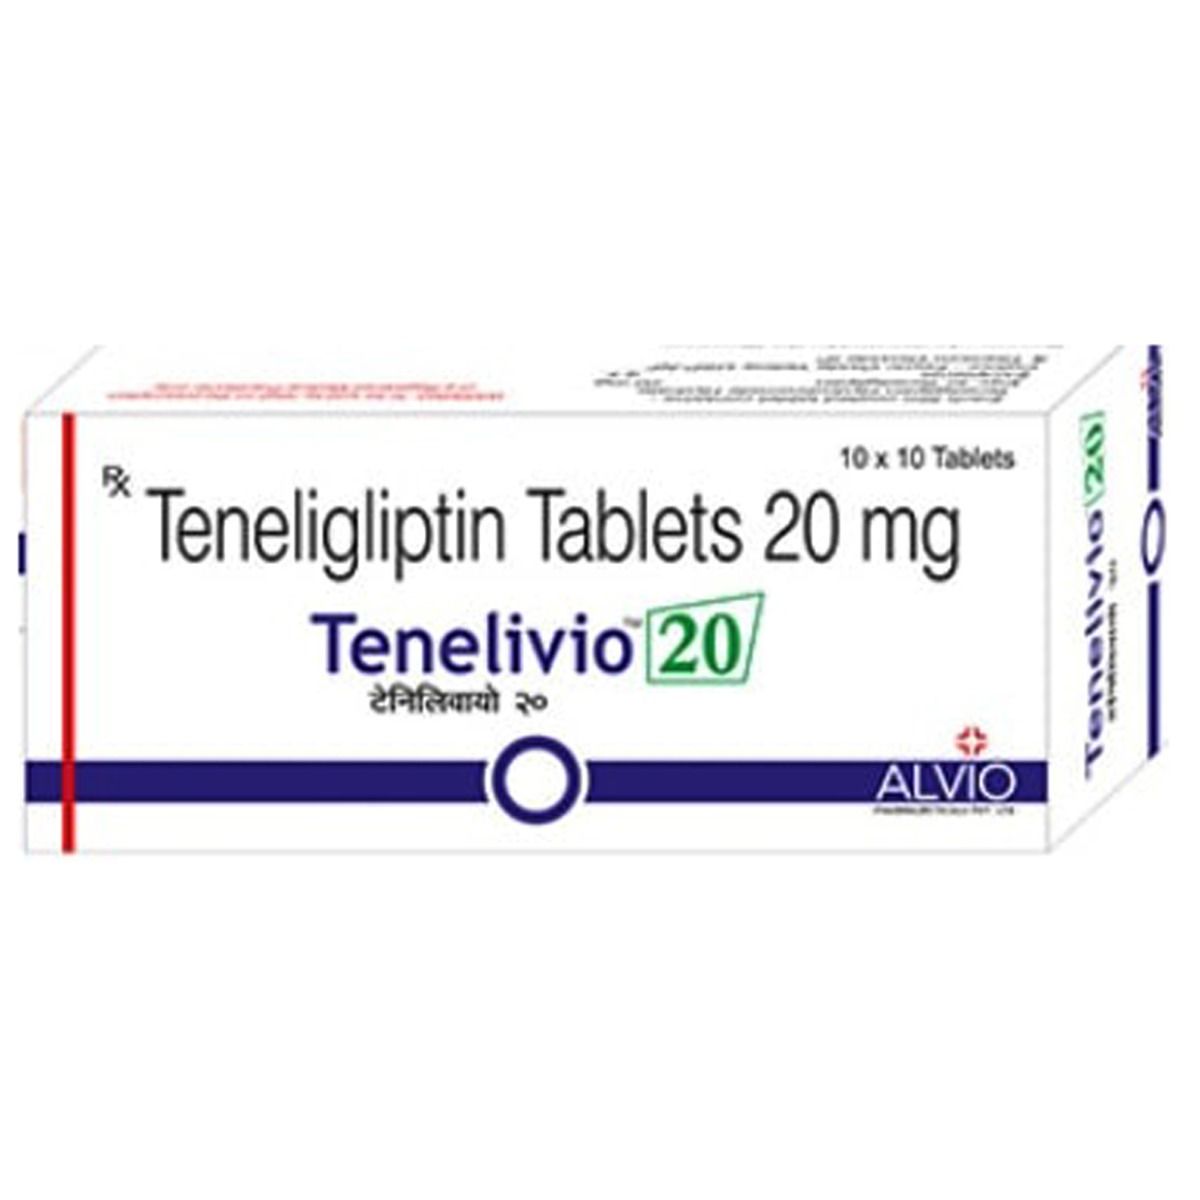 Tenelivio 20 Tablet 10's, Pack of 10 TABLETS